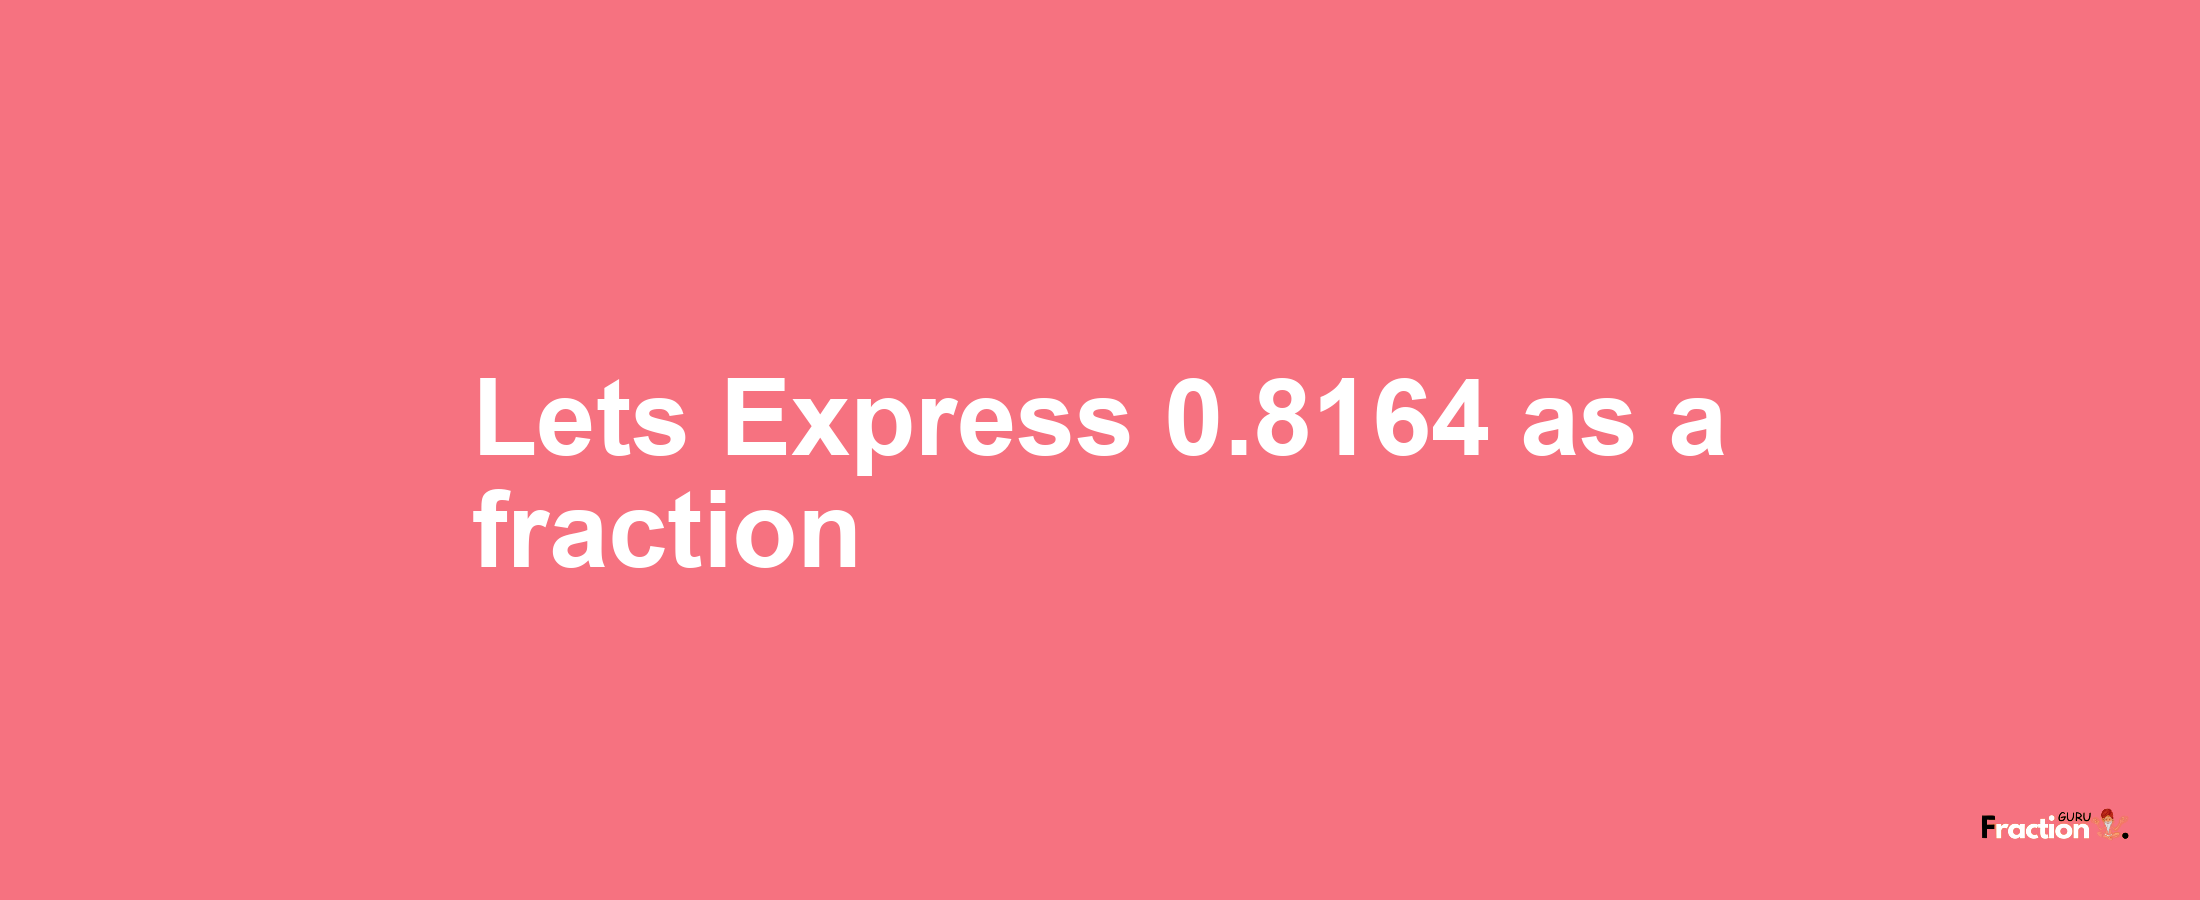 Lets Express 0.8164 as afraction